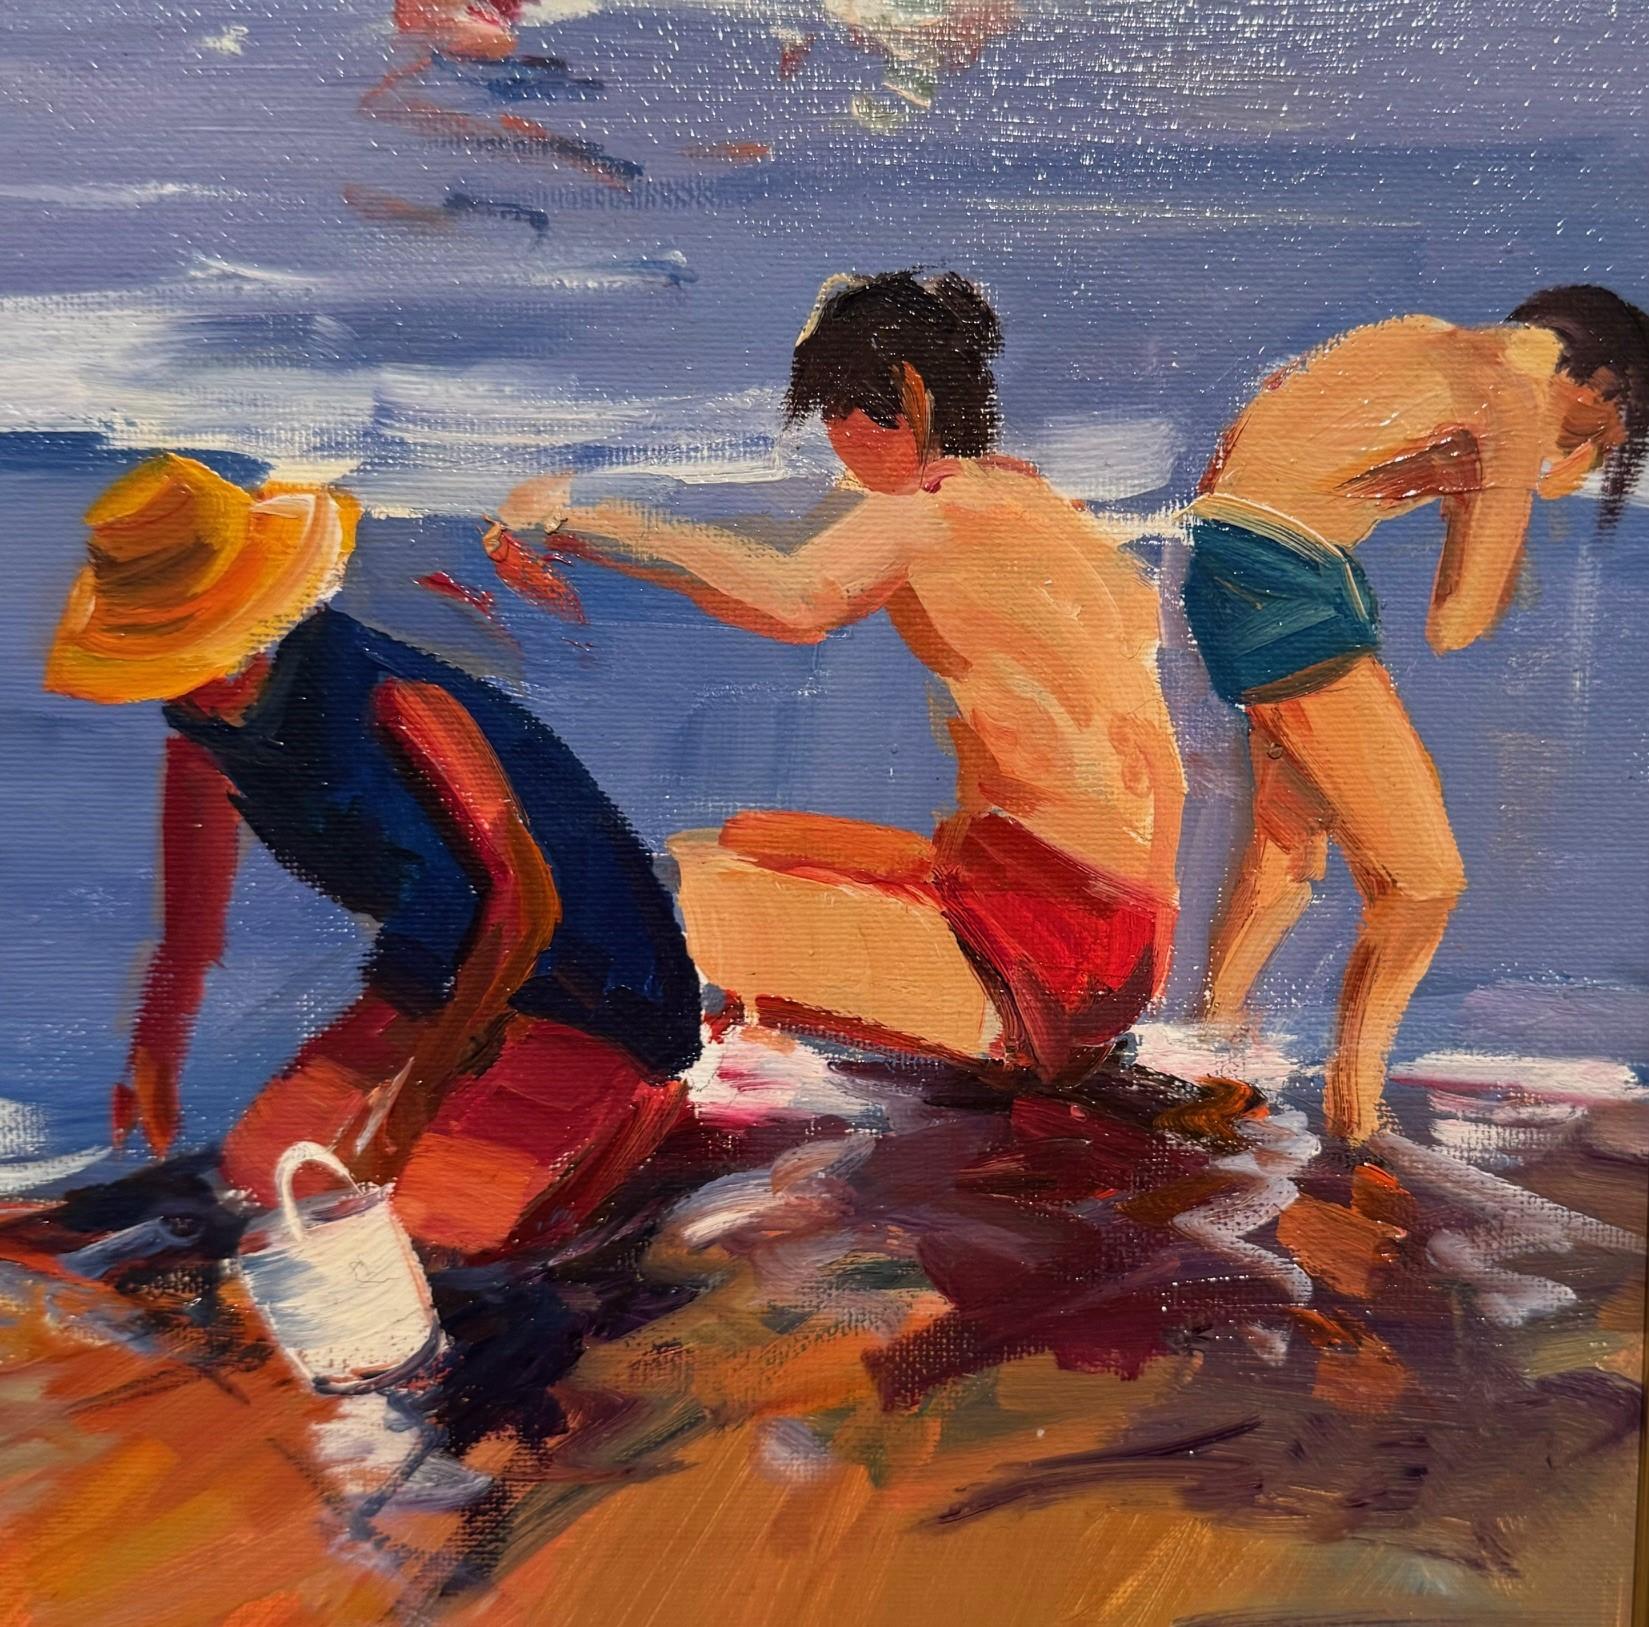 Saturday in the Sun - Impressionist Painting by Ventura Diaz